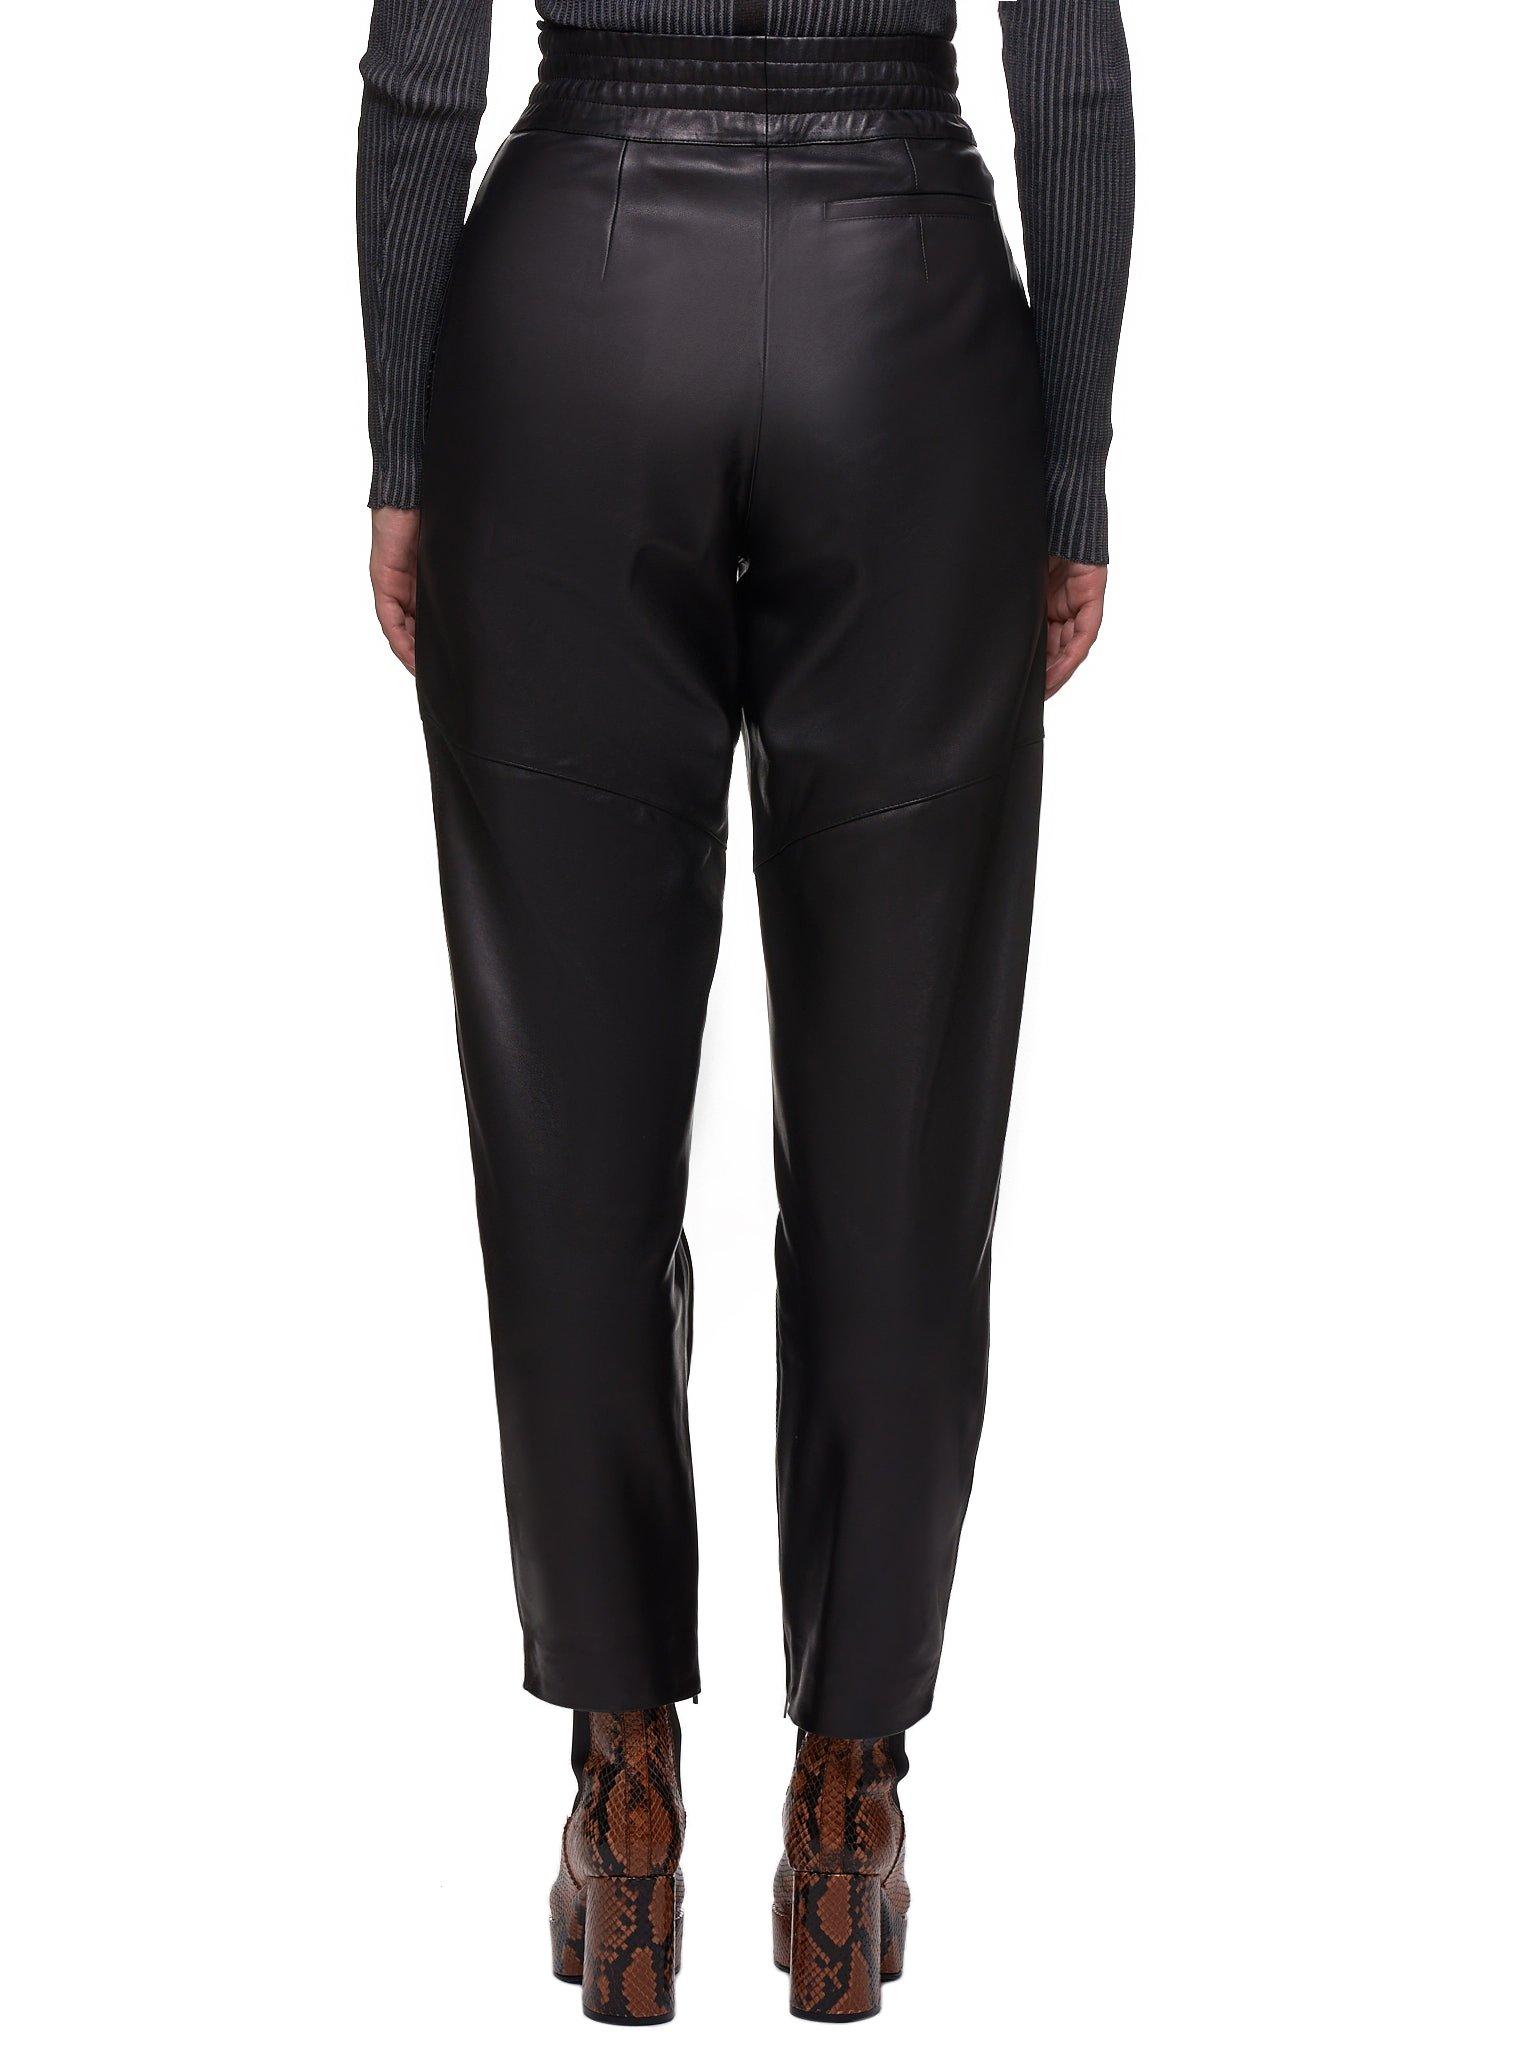 Acne Studios Leather Trousers in Black - Lyst